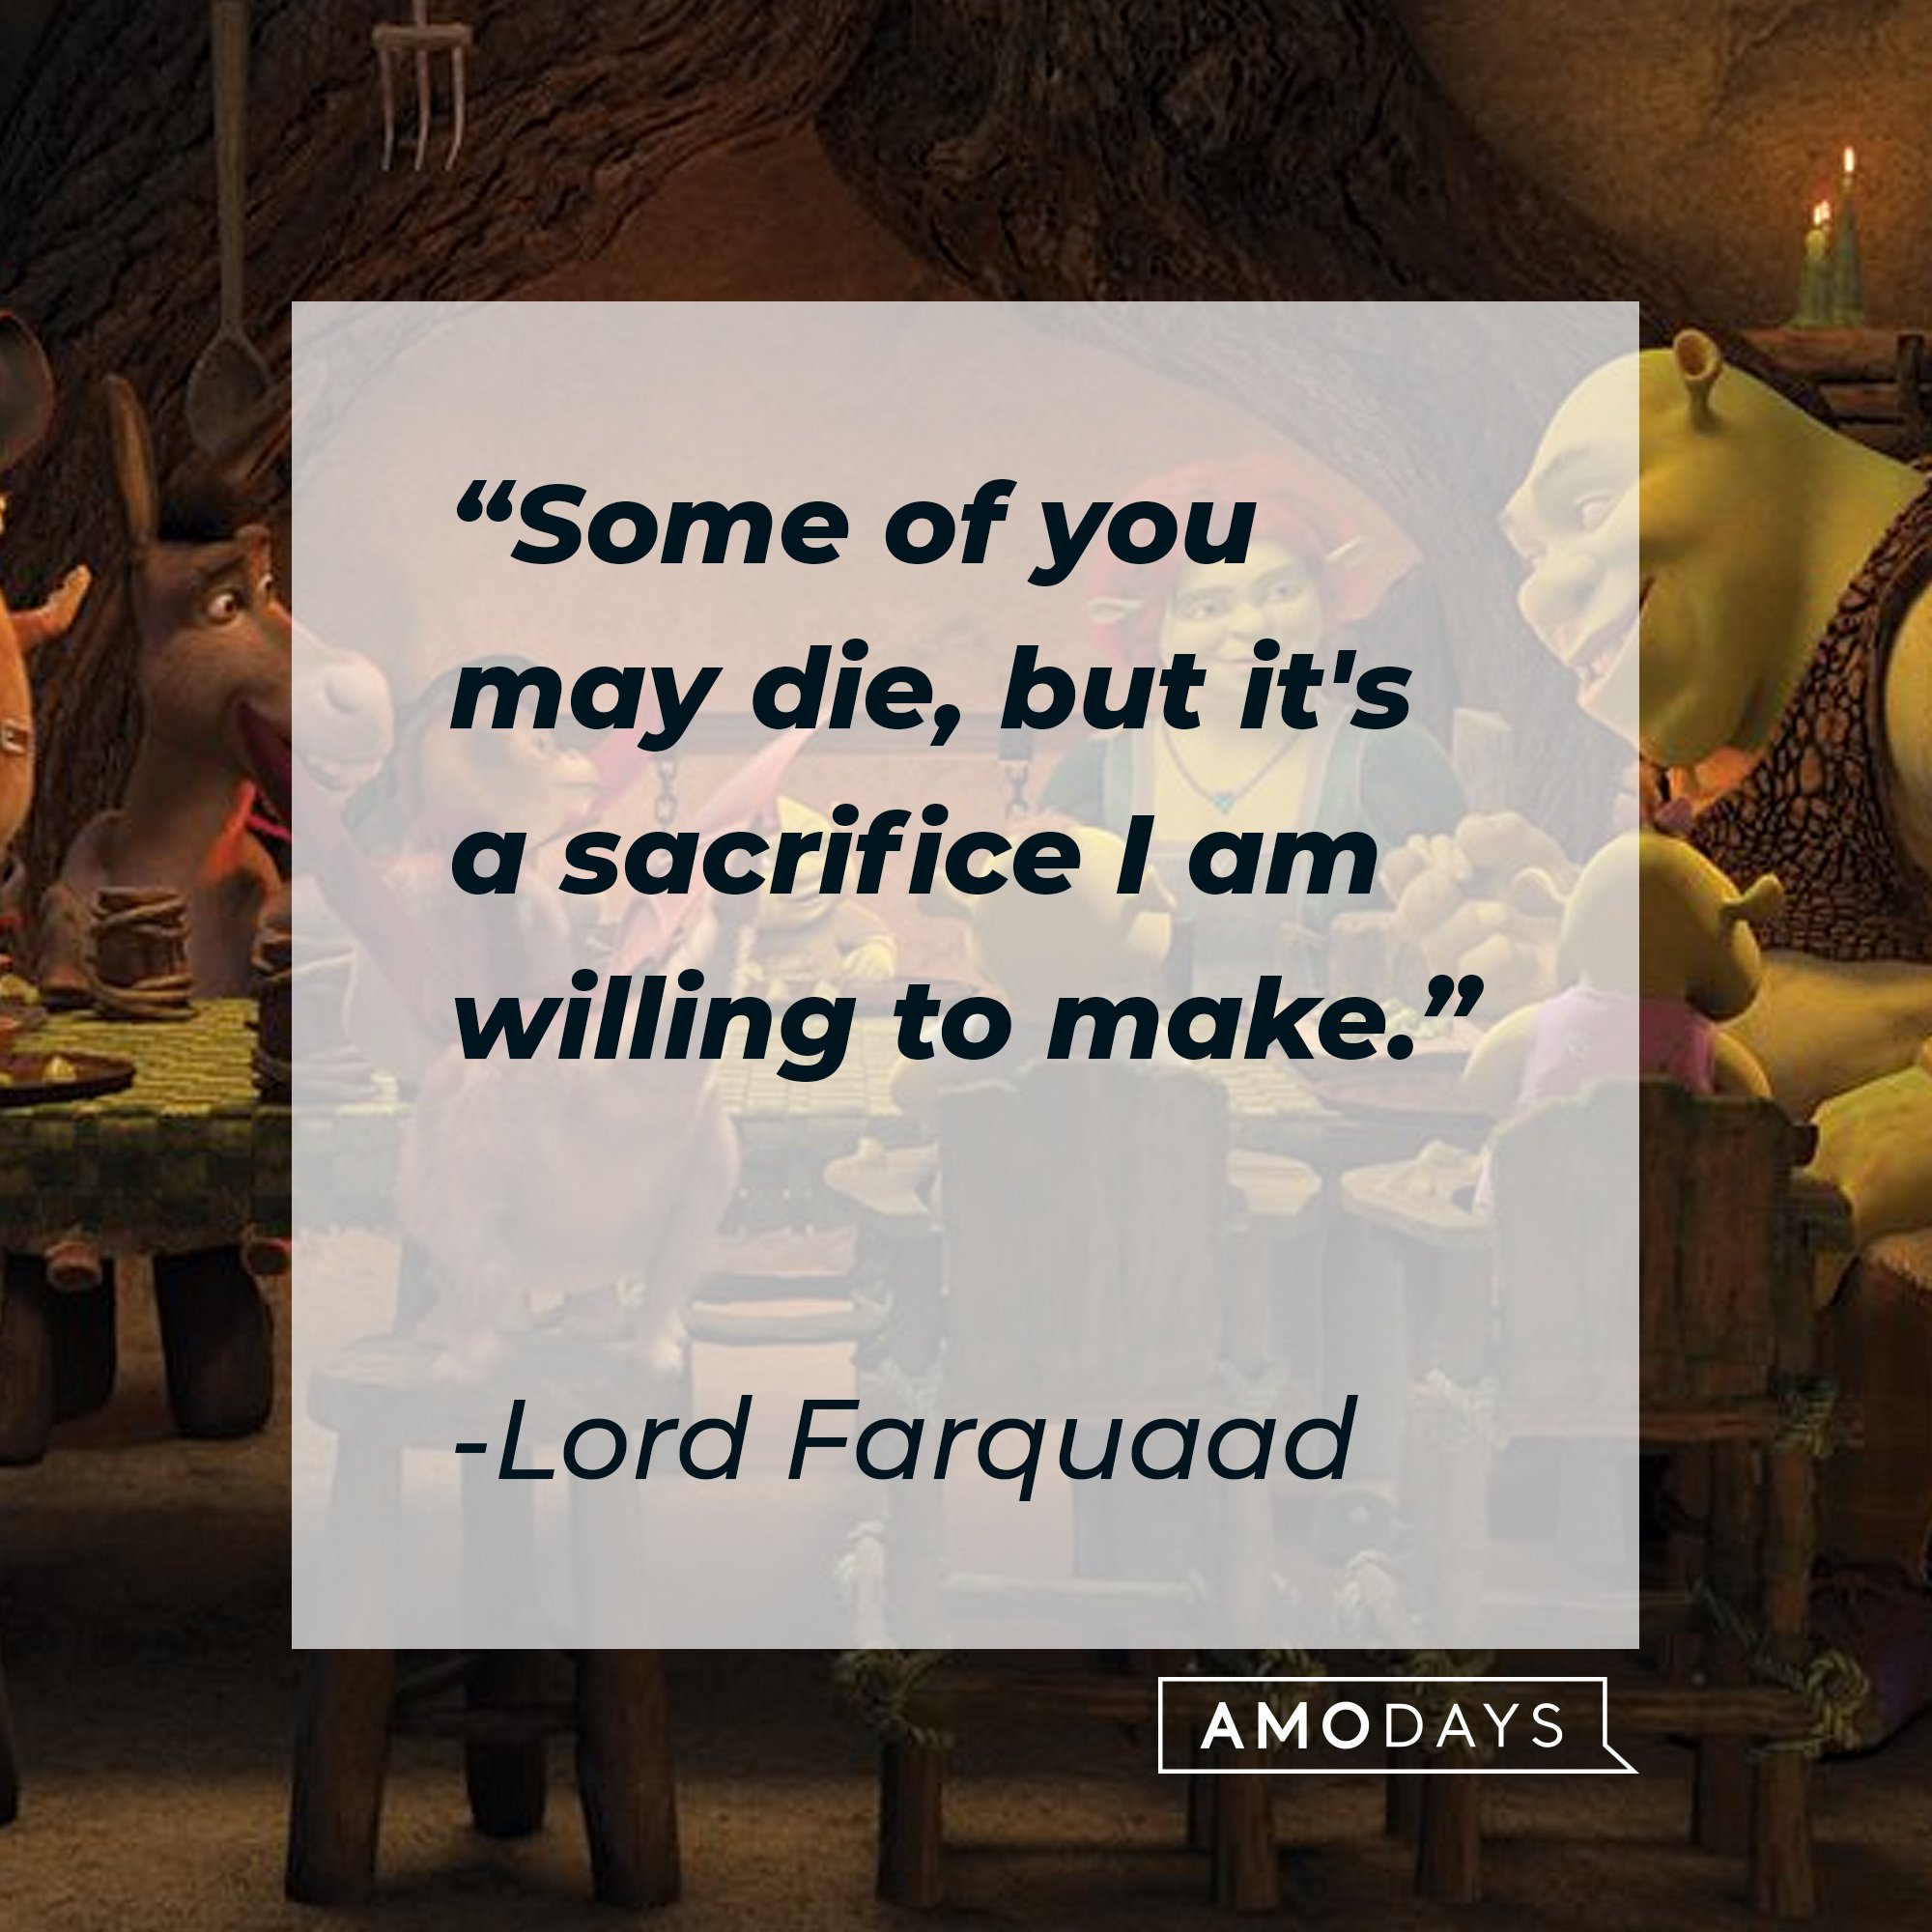 Lord Farquaad’s quote: "Some of you may die, but it's a sacrifice I am willing to make." | Image: AmoDays 